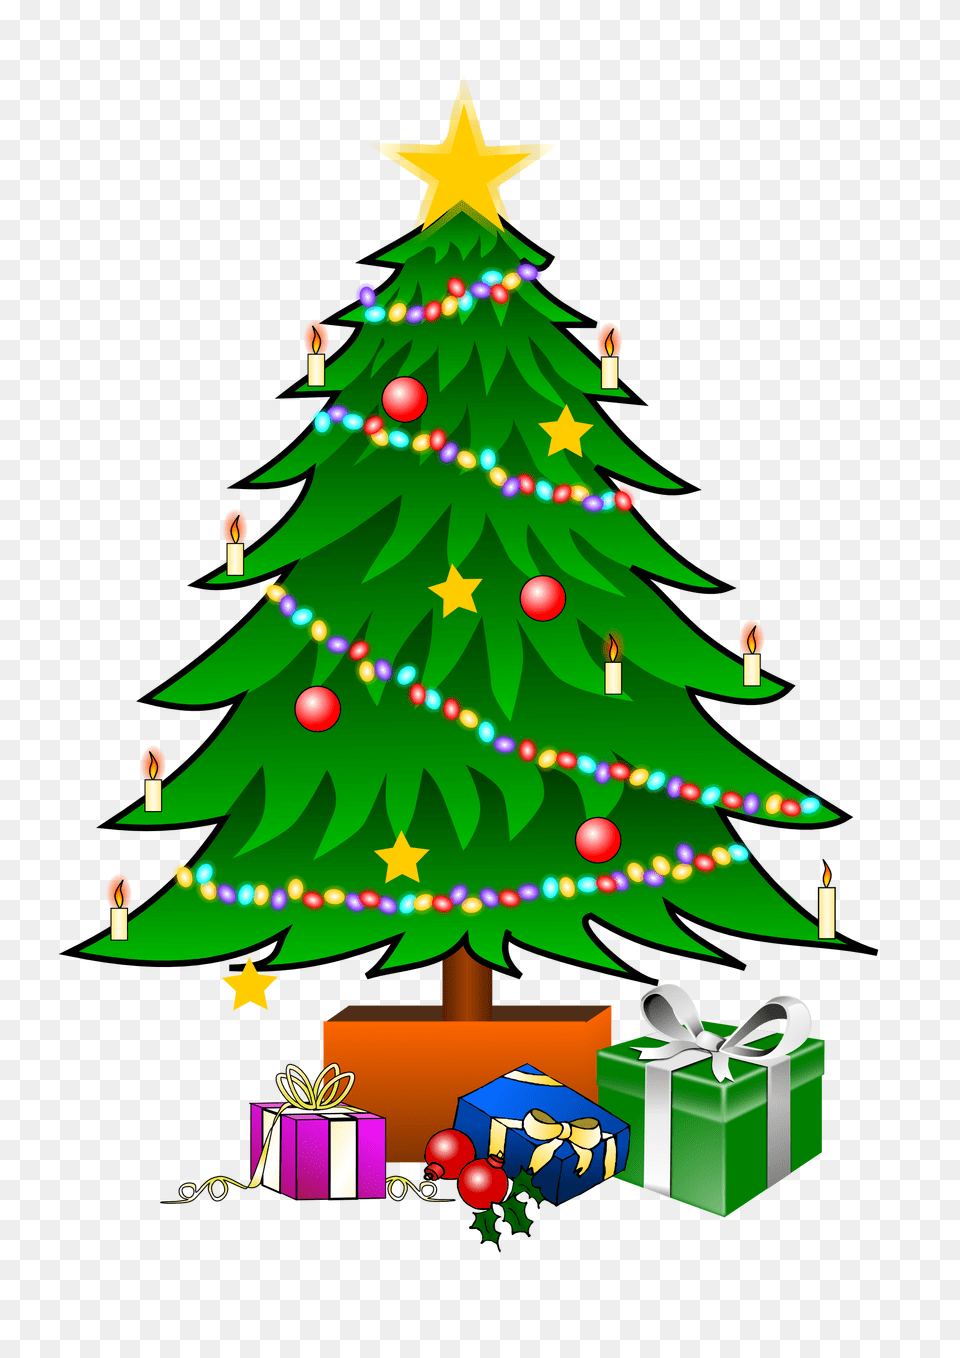 Christmas Tree Clip Art Is A Fun Way To Add One Of The Most, Plant, Christmas Decorations, Festival, Christmas Tree Free Png